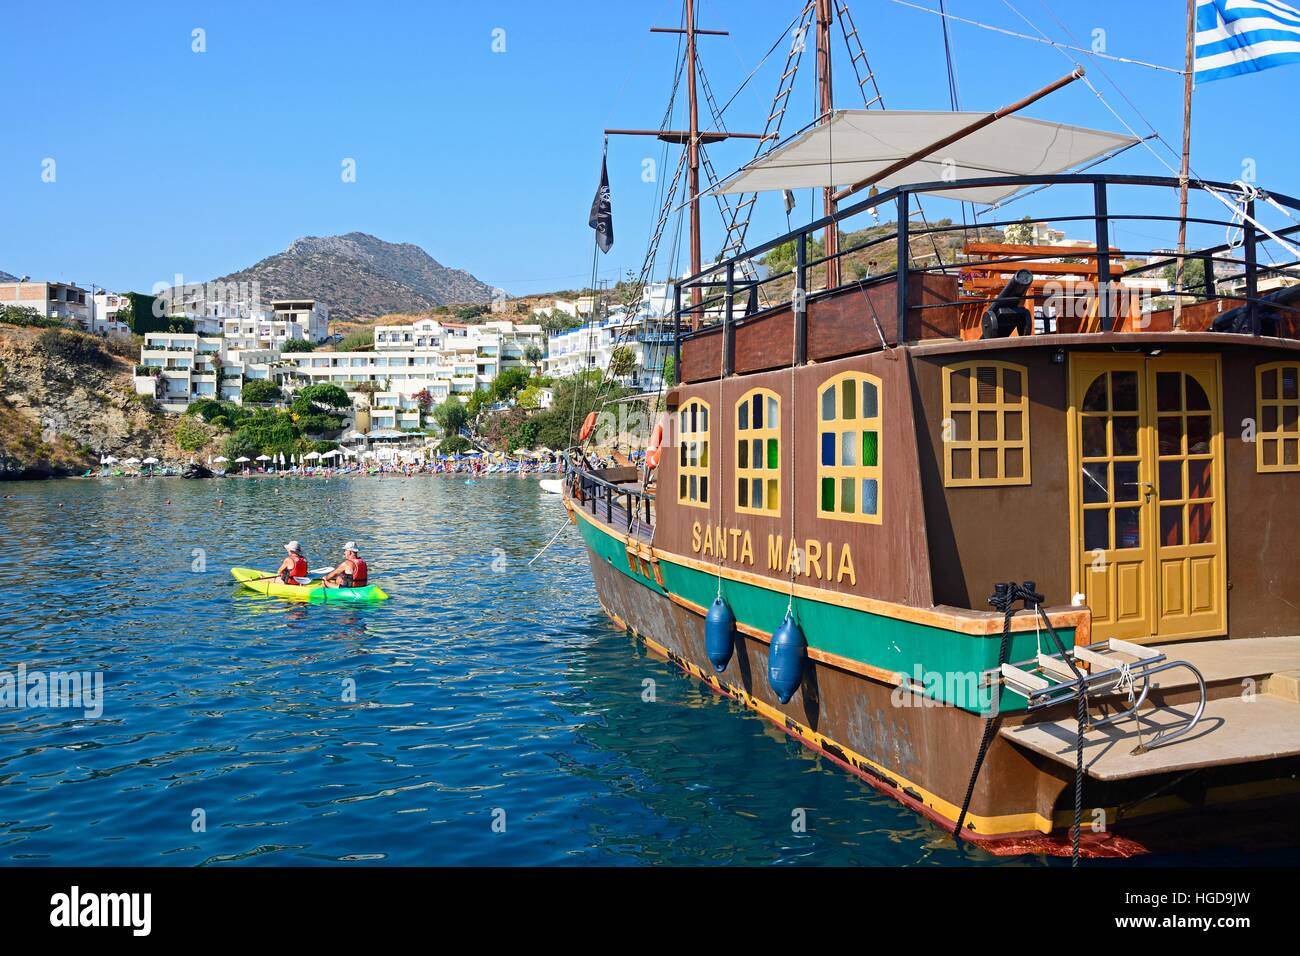 Santa Maria Galleon ship in the harbour with a couple canoeing and tourists relaxing on the beach to the rear, Bali, Crete, Greece, Europe. Stock Photo